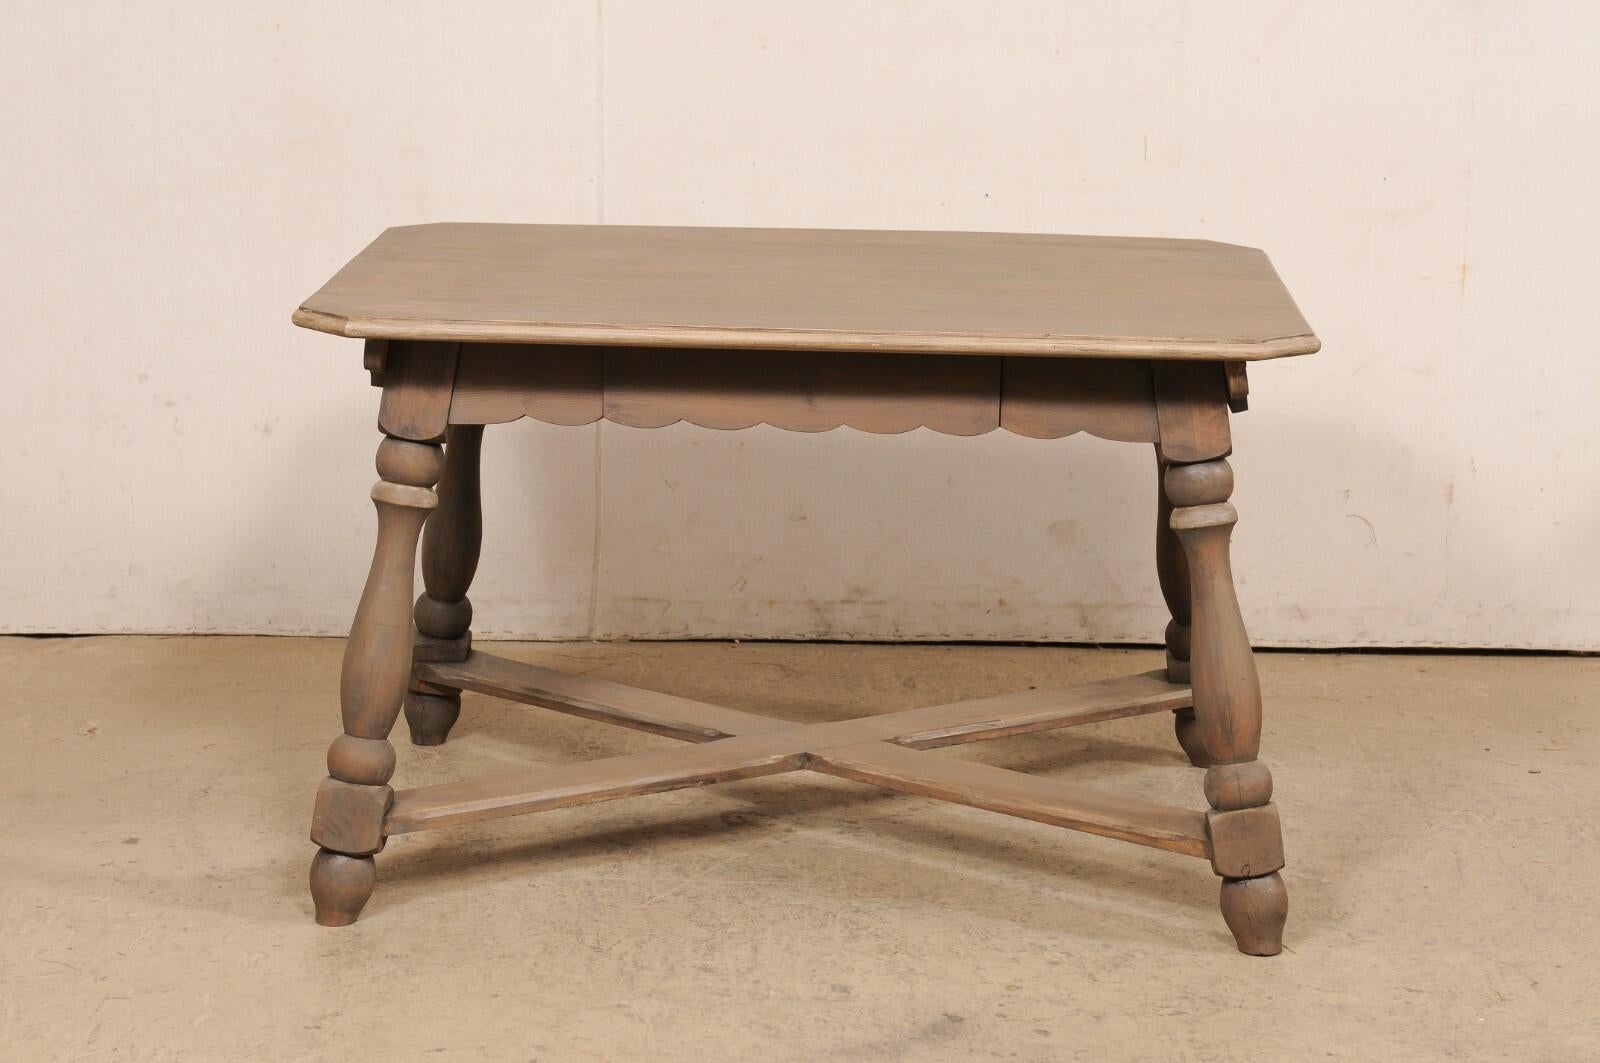 20th Century European Wooden Table w/Scalloped Apron, Nicely Turned Legs & X-Stretcher For Sale